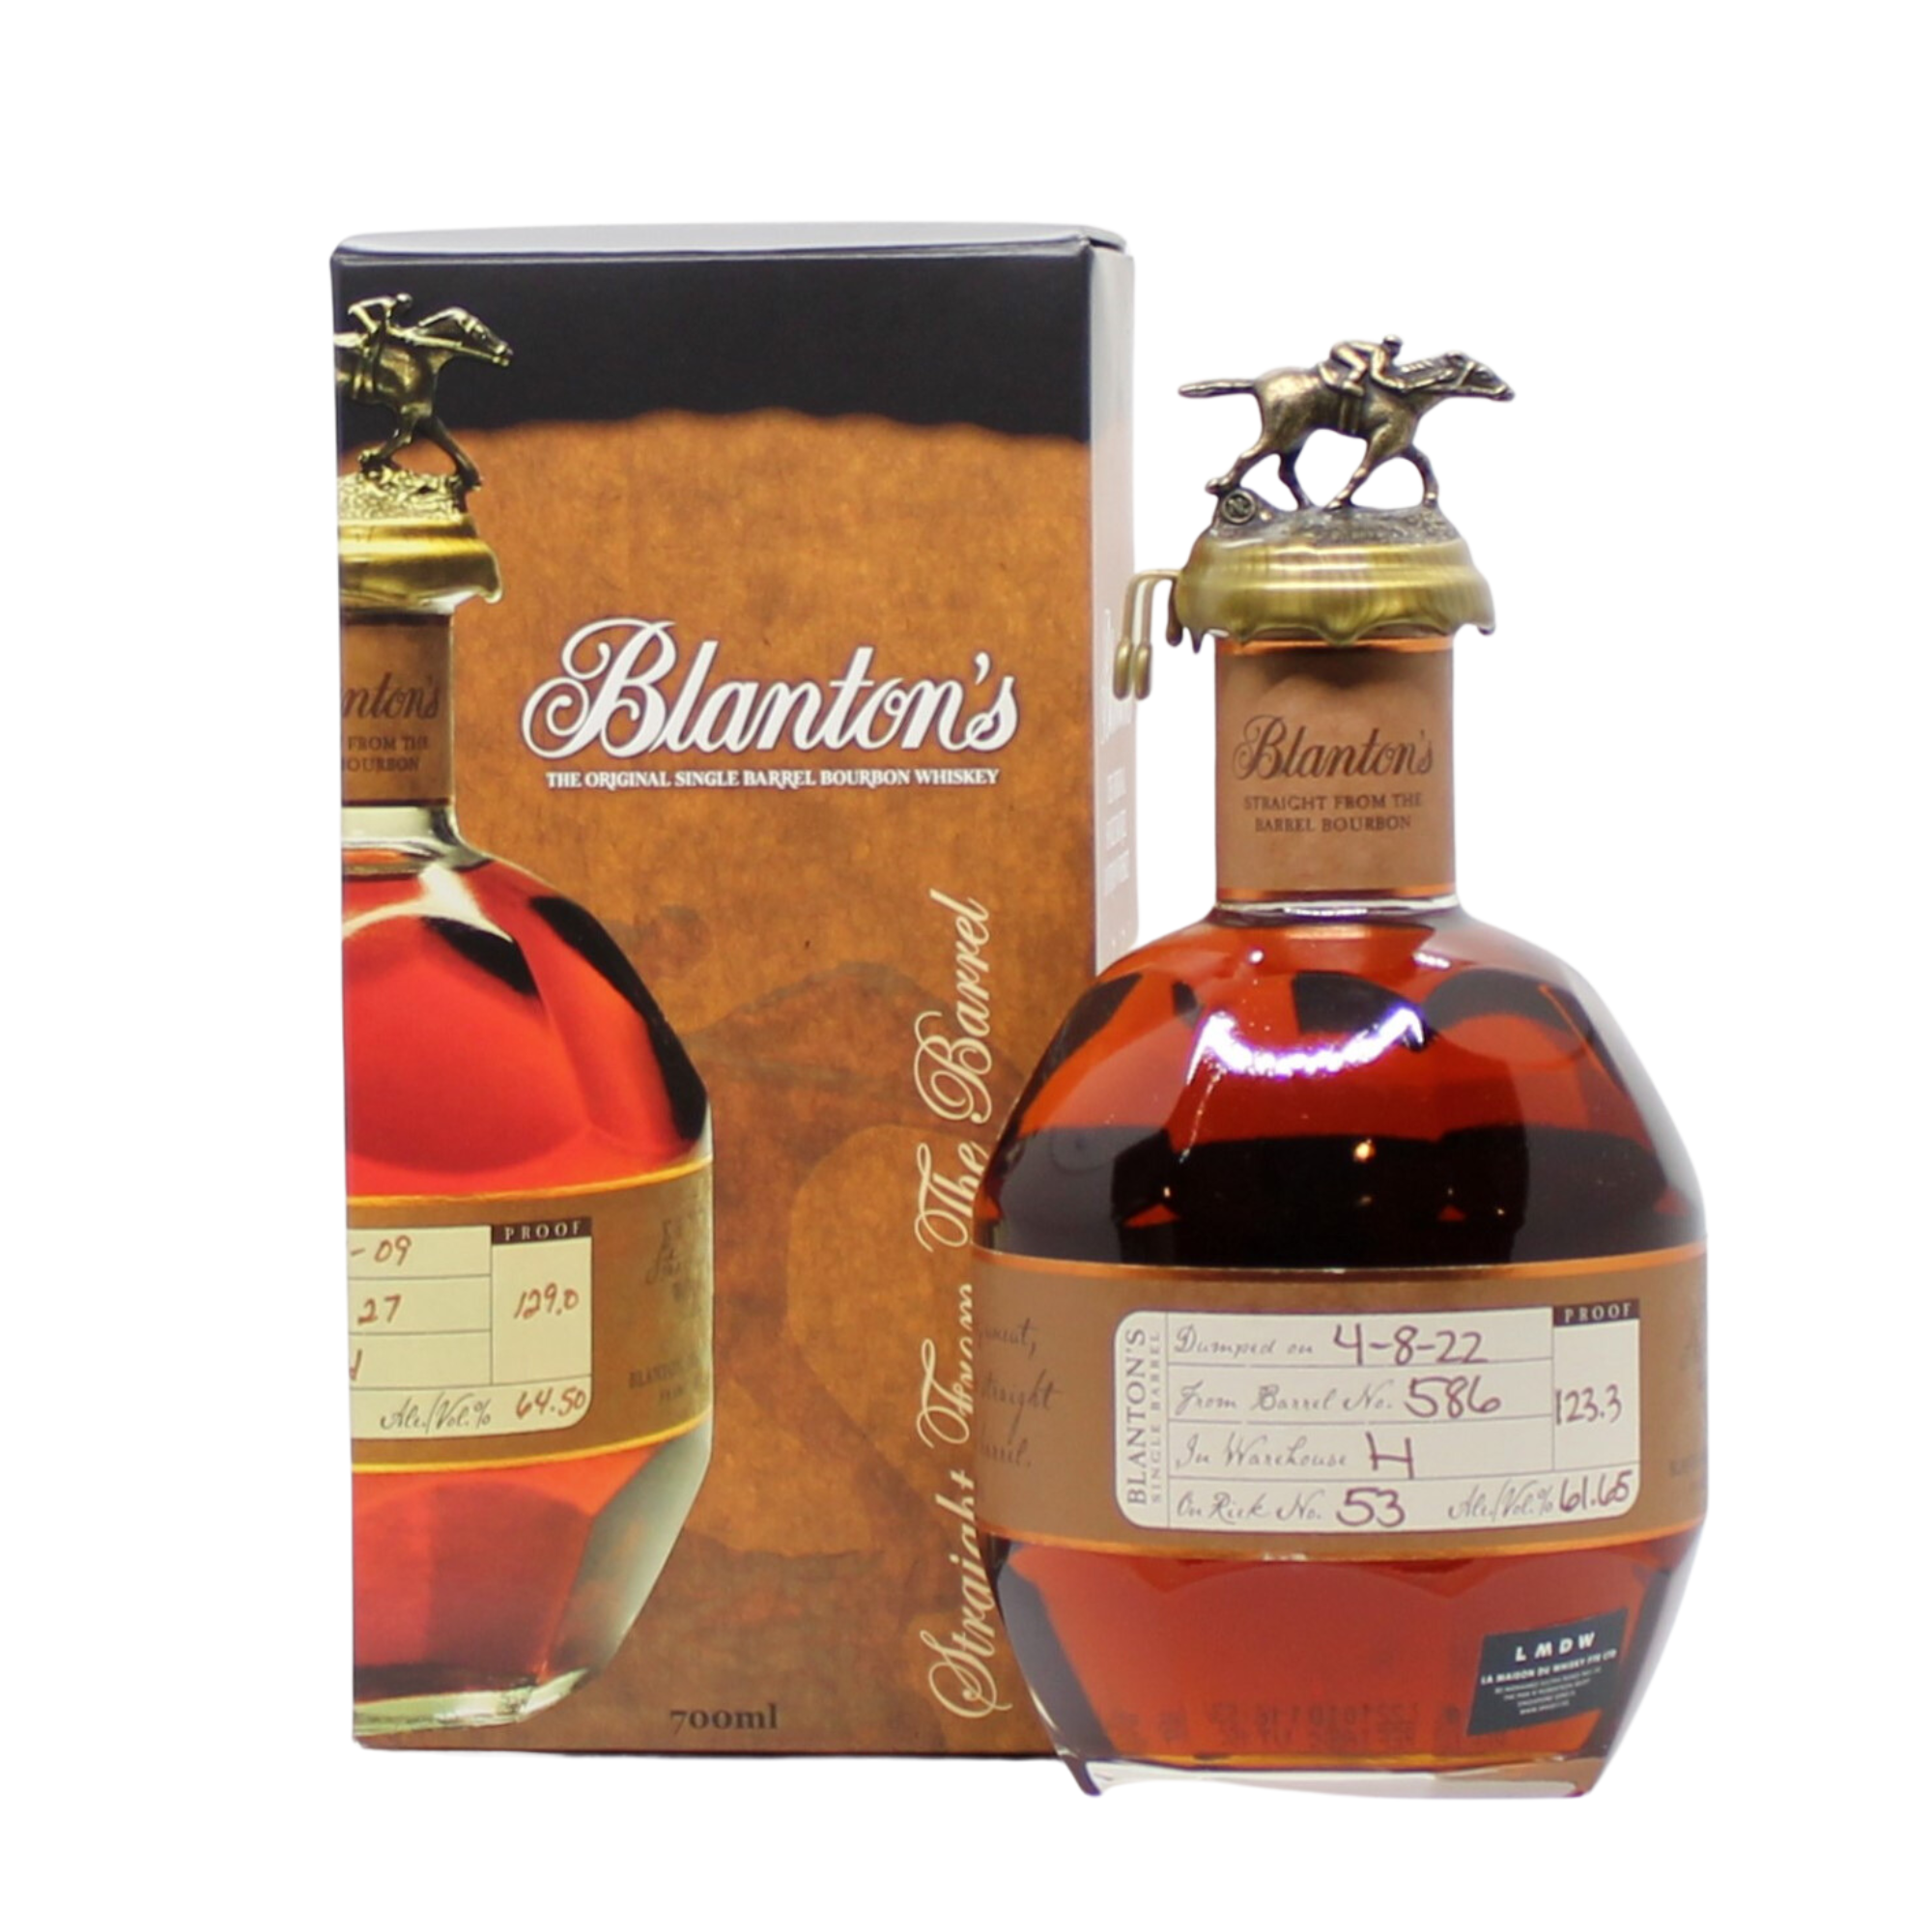 Blanton's Straight from the Barrel dumped 2022